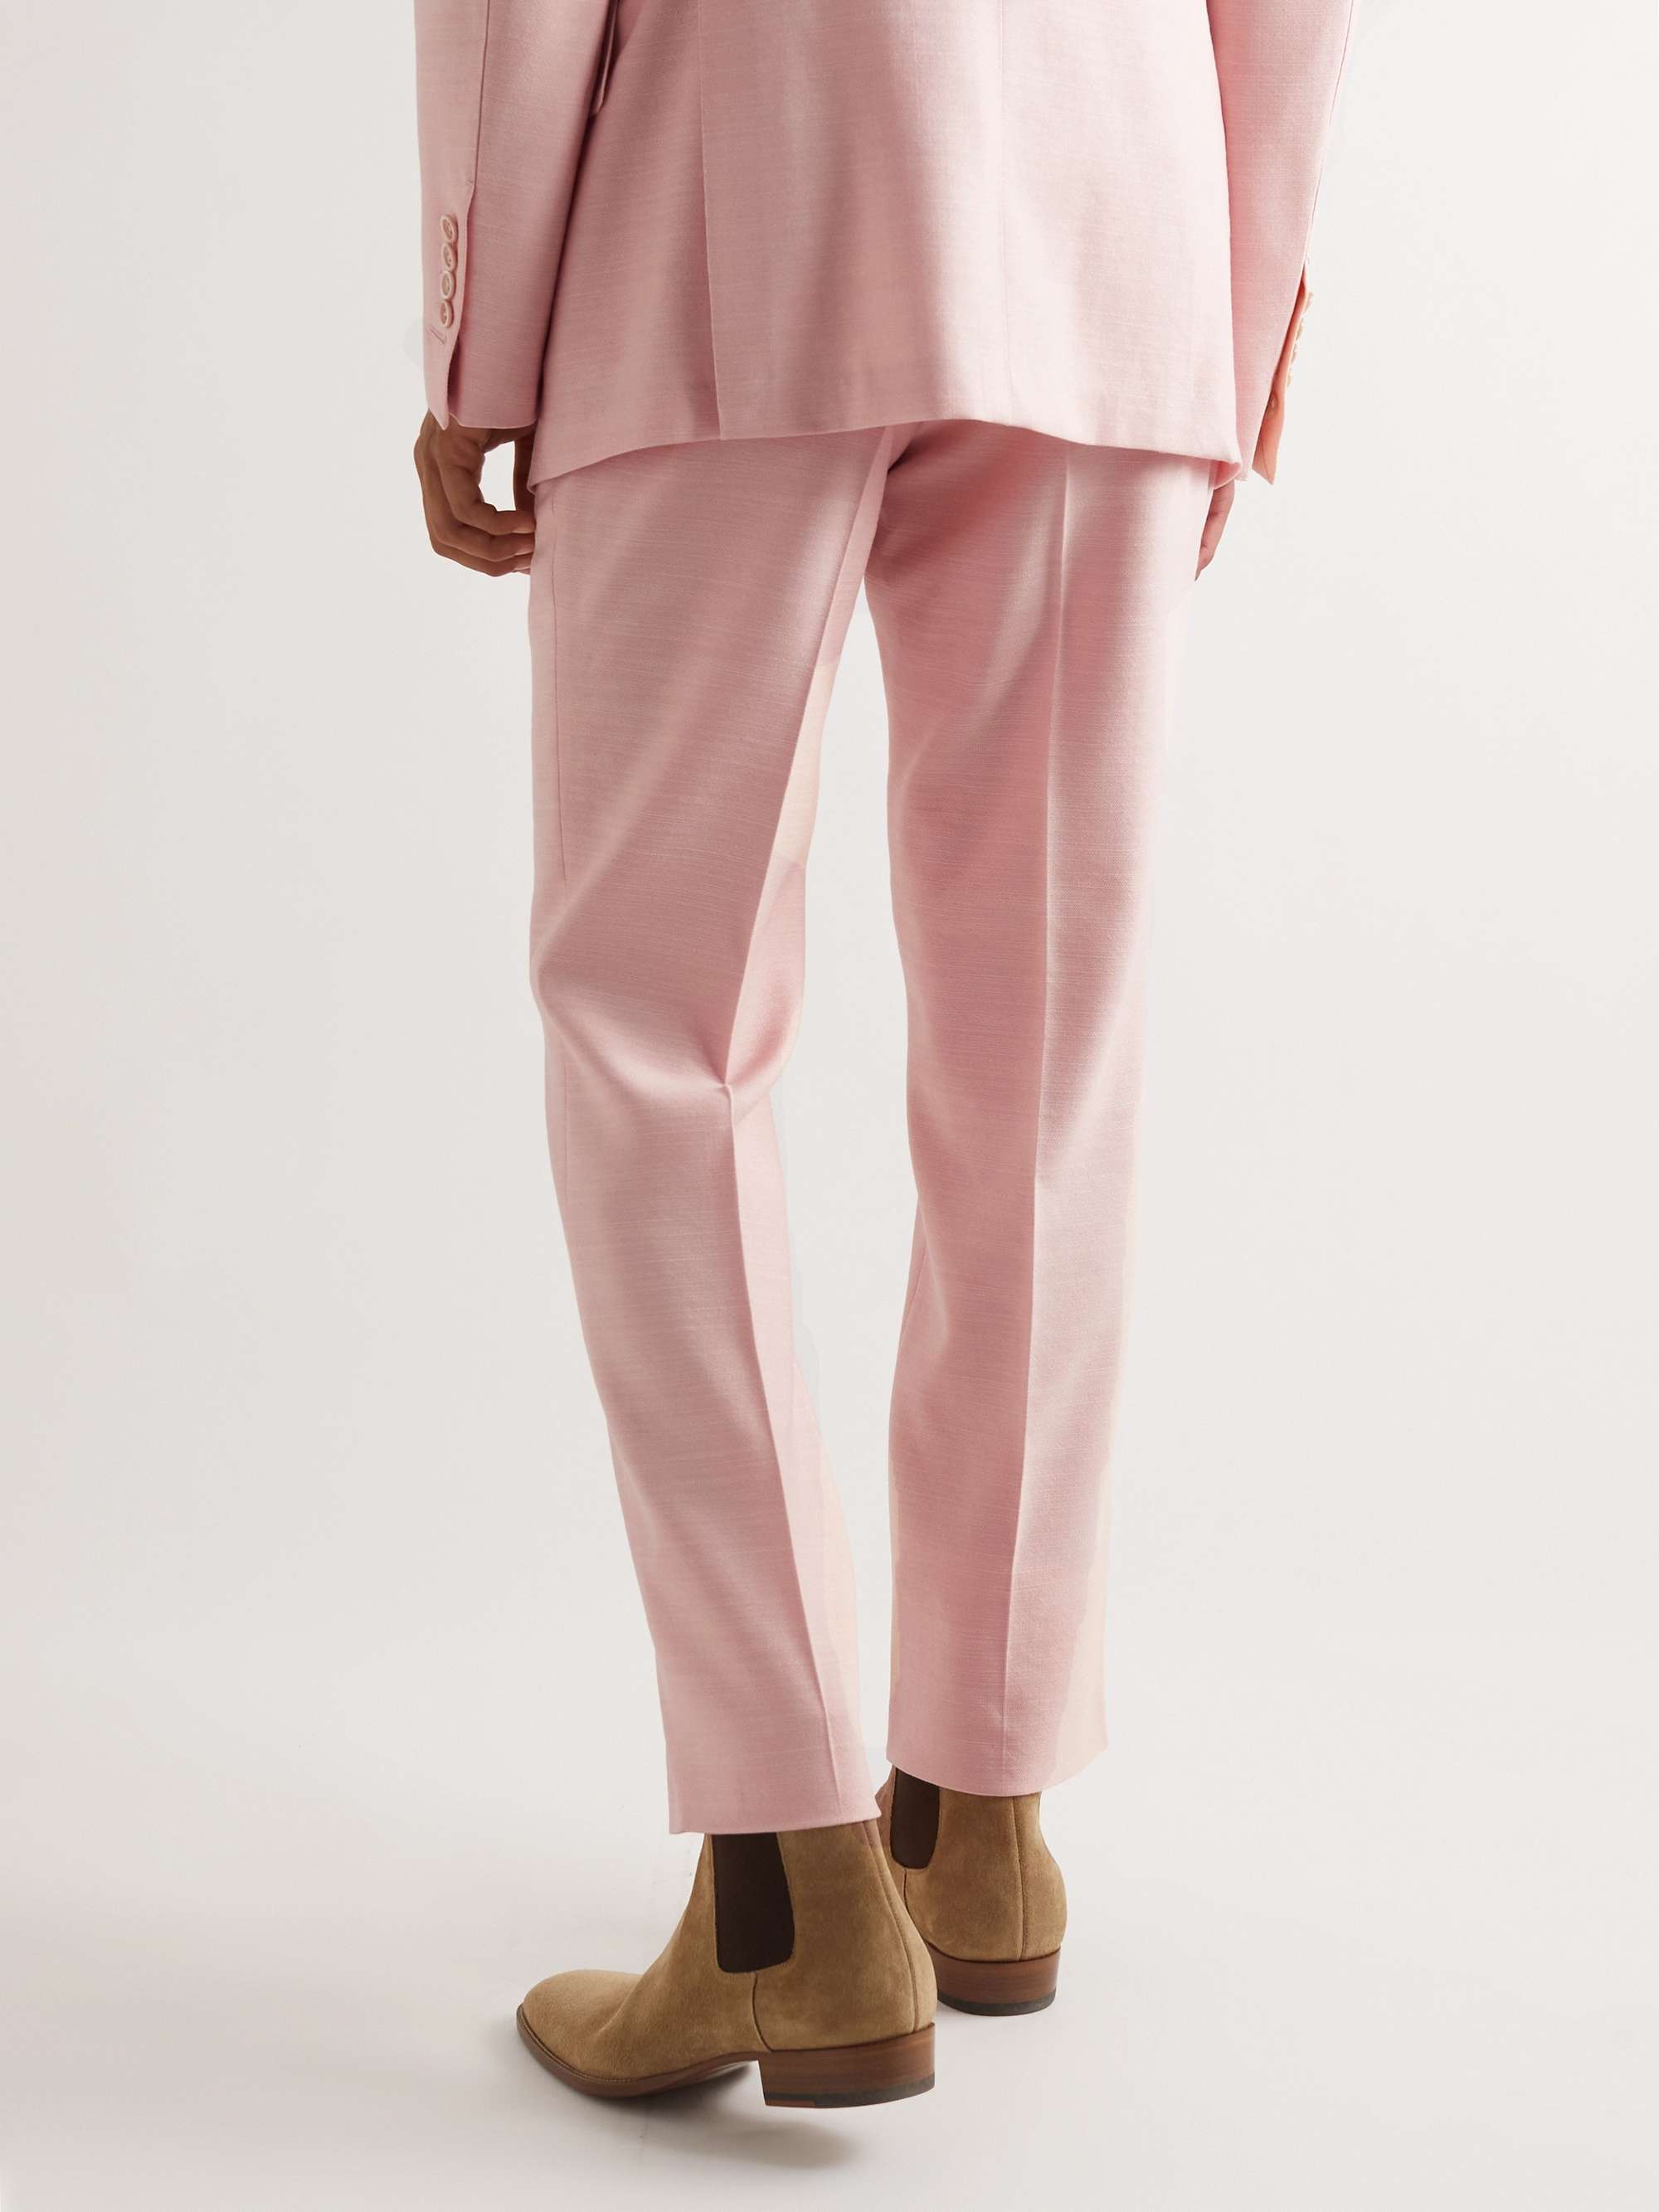 TOM FORD Straight-Leg Silk, Wool and Mohair-Blend Suit Trousers